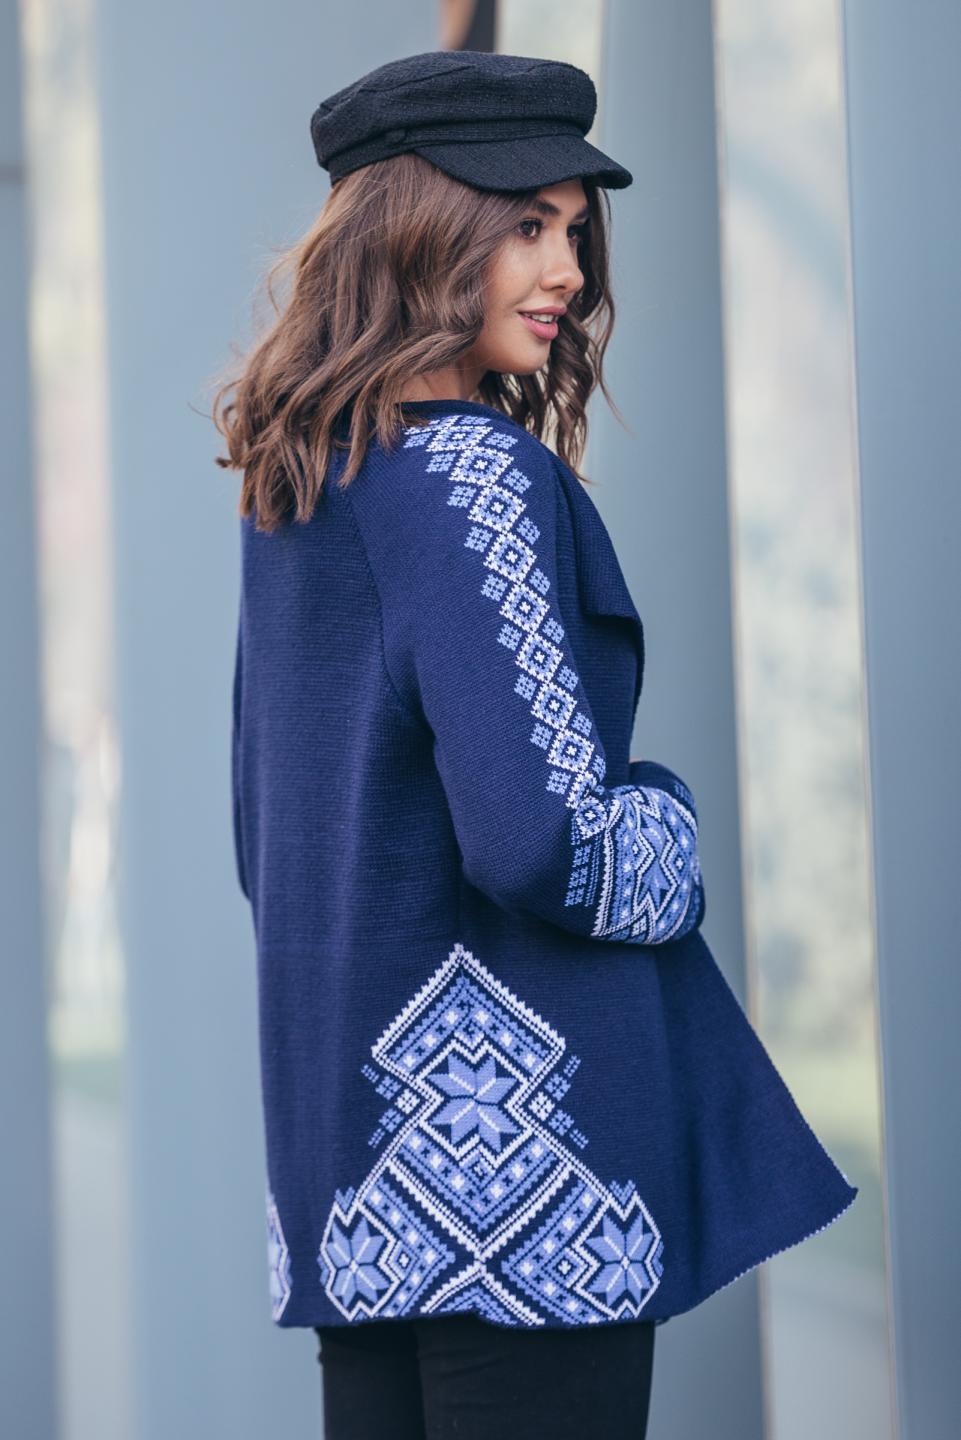 Knitted jacket in ethnic style &quot;Hrystina&quot; (blue, cornflower, white)